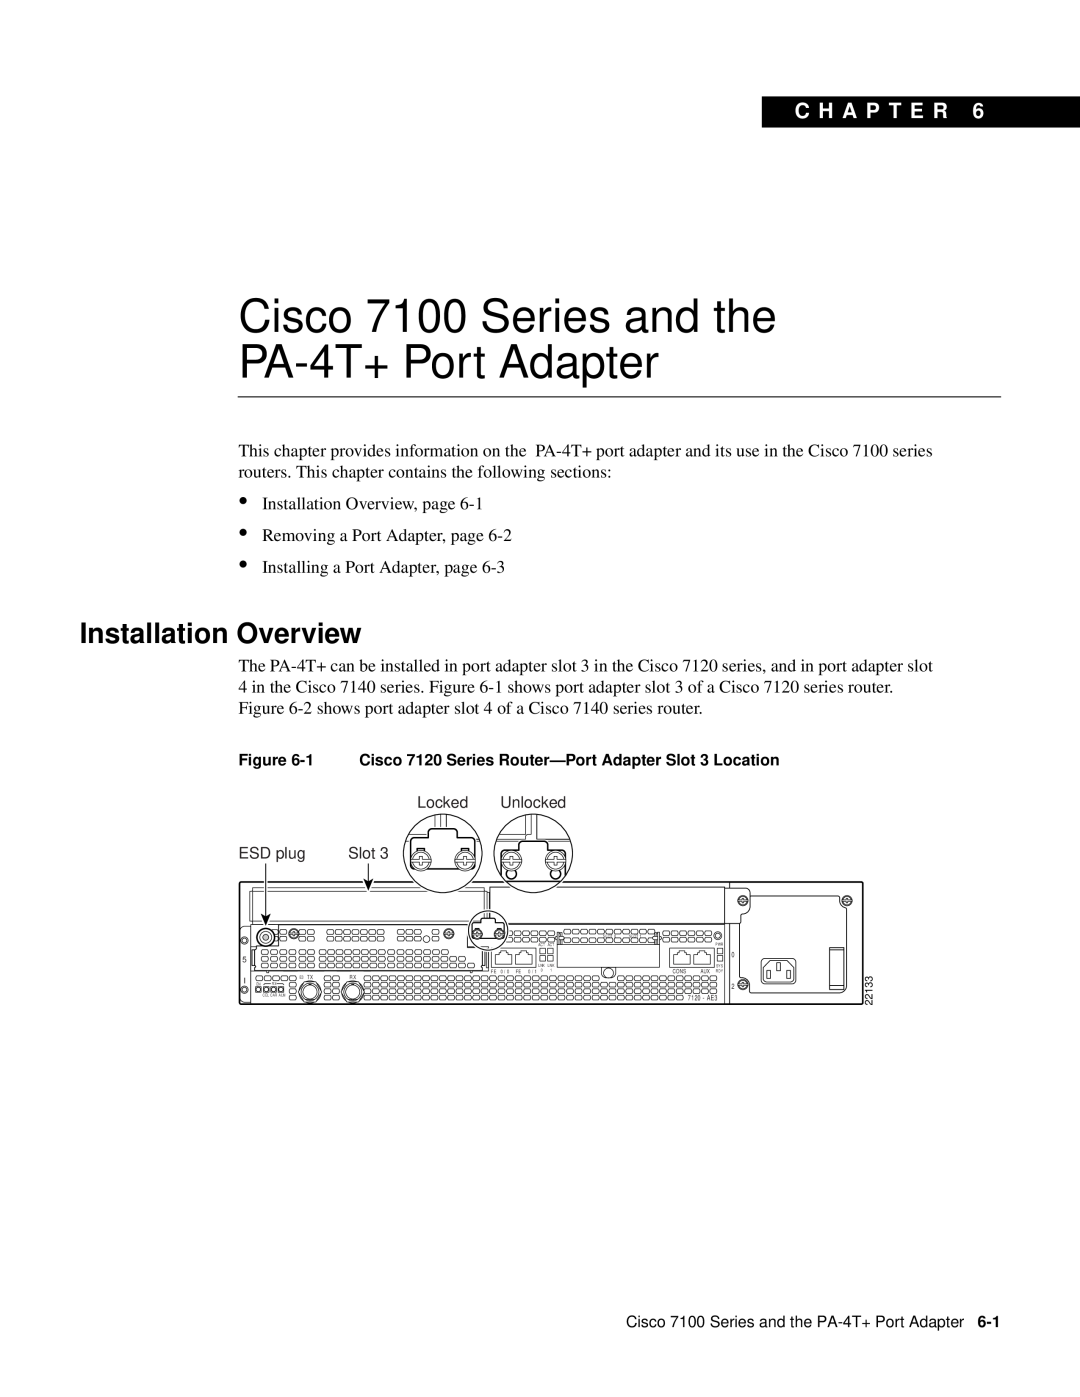 Cisco Systems manual Cisco 7100 Series and the PA-4T+ Port Adapter, Installation Overview, C H A P T E R 